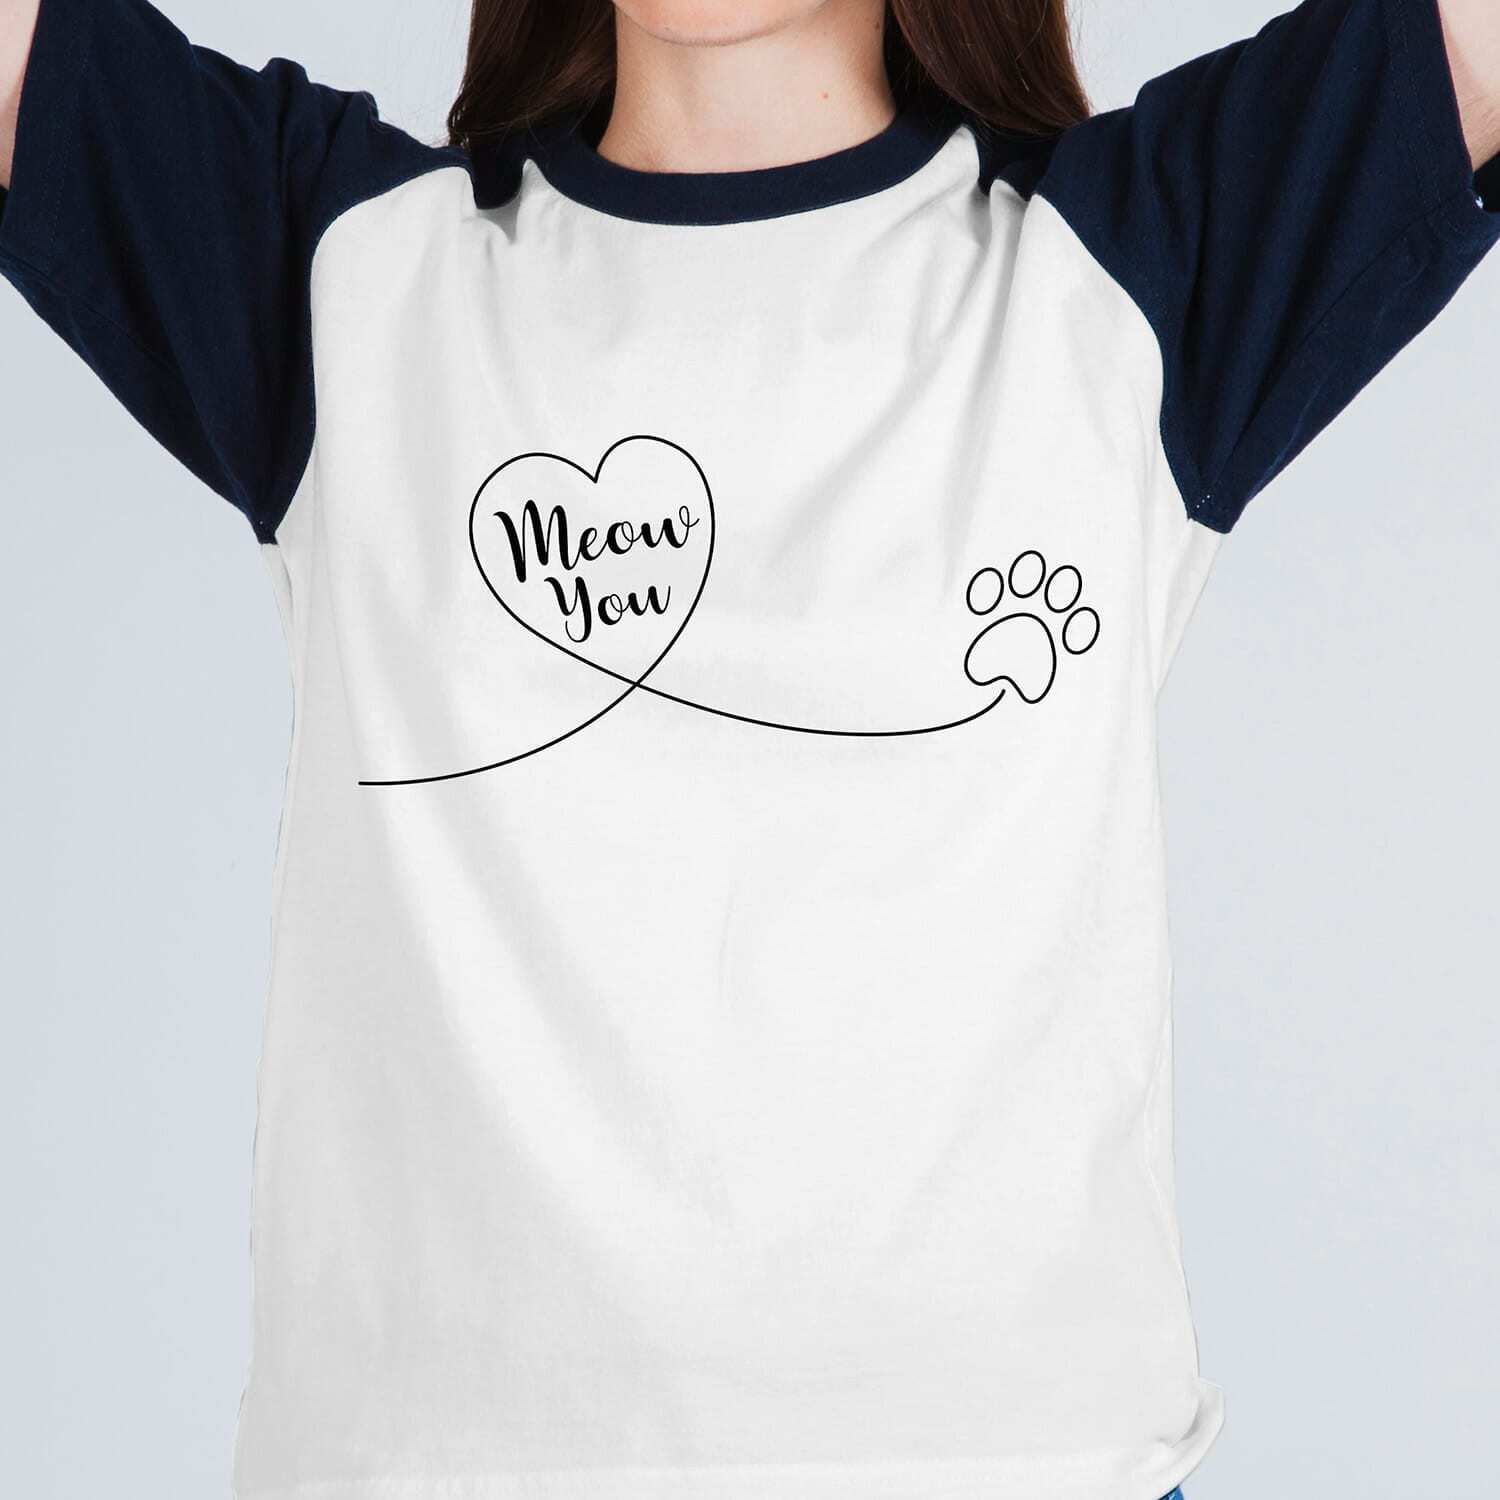 Meow you t shirt design For Cat Lovers